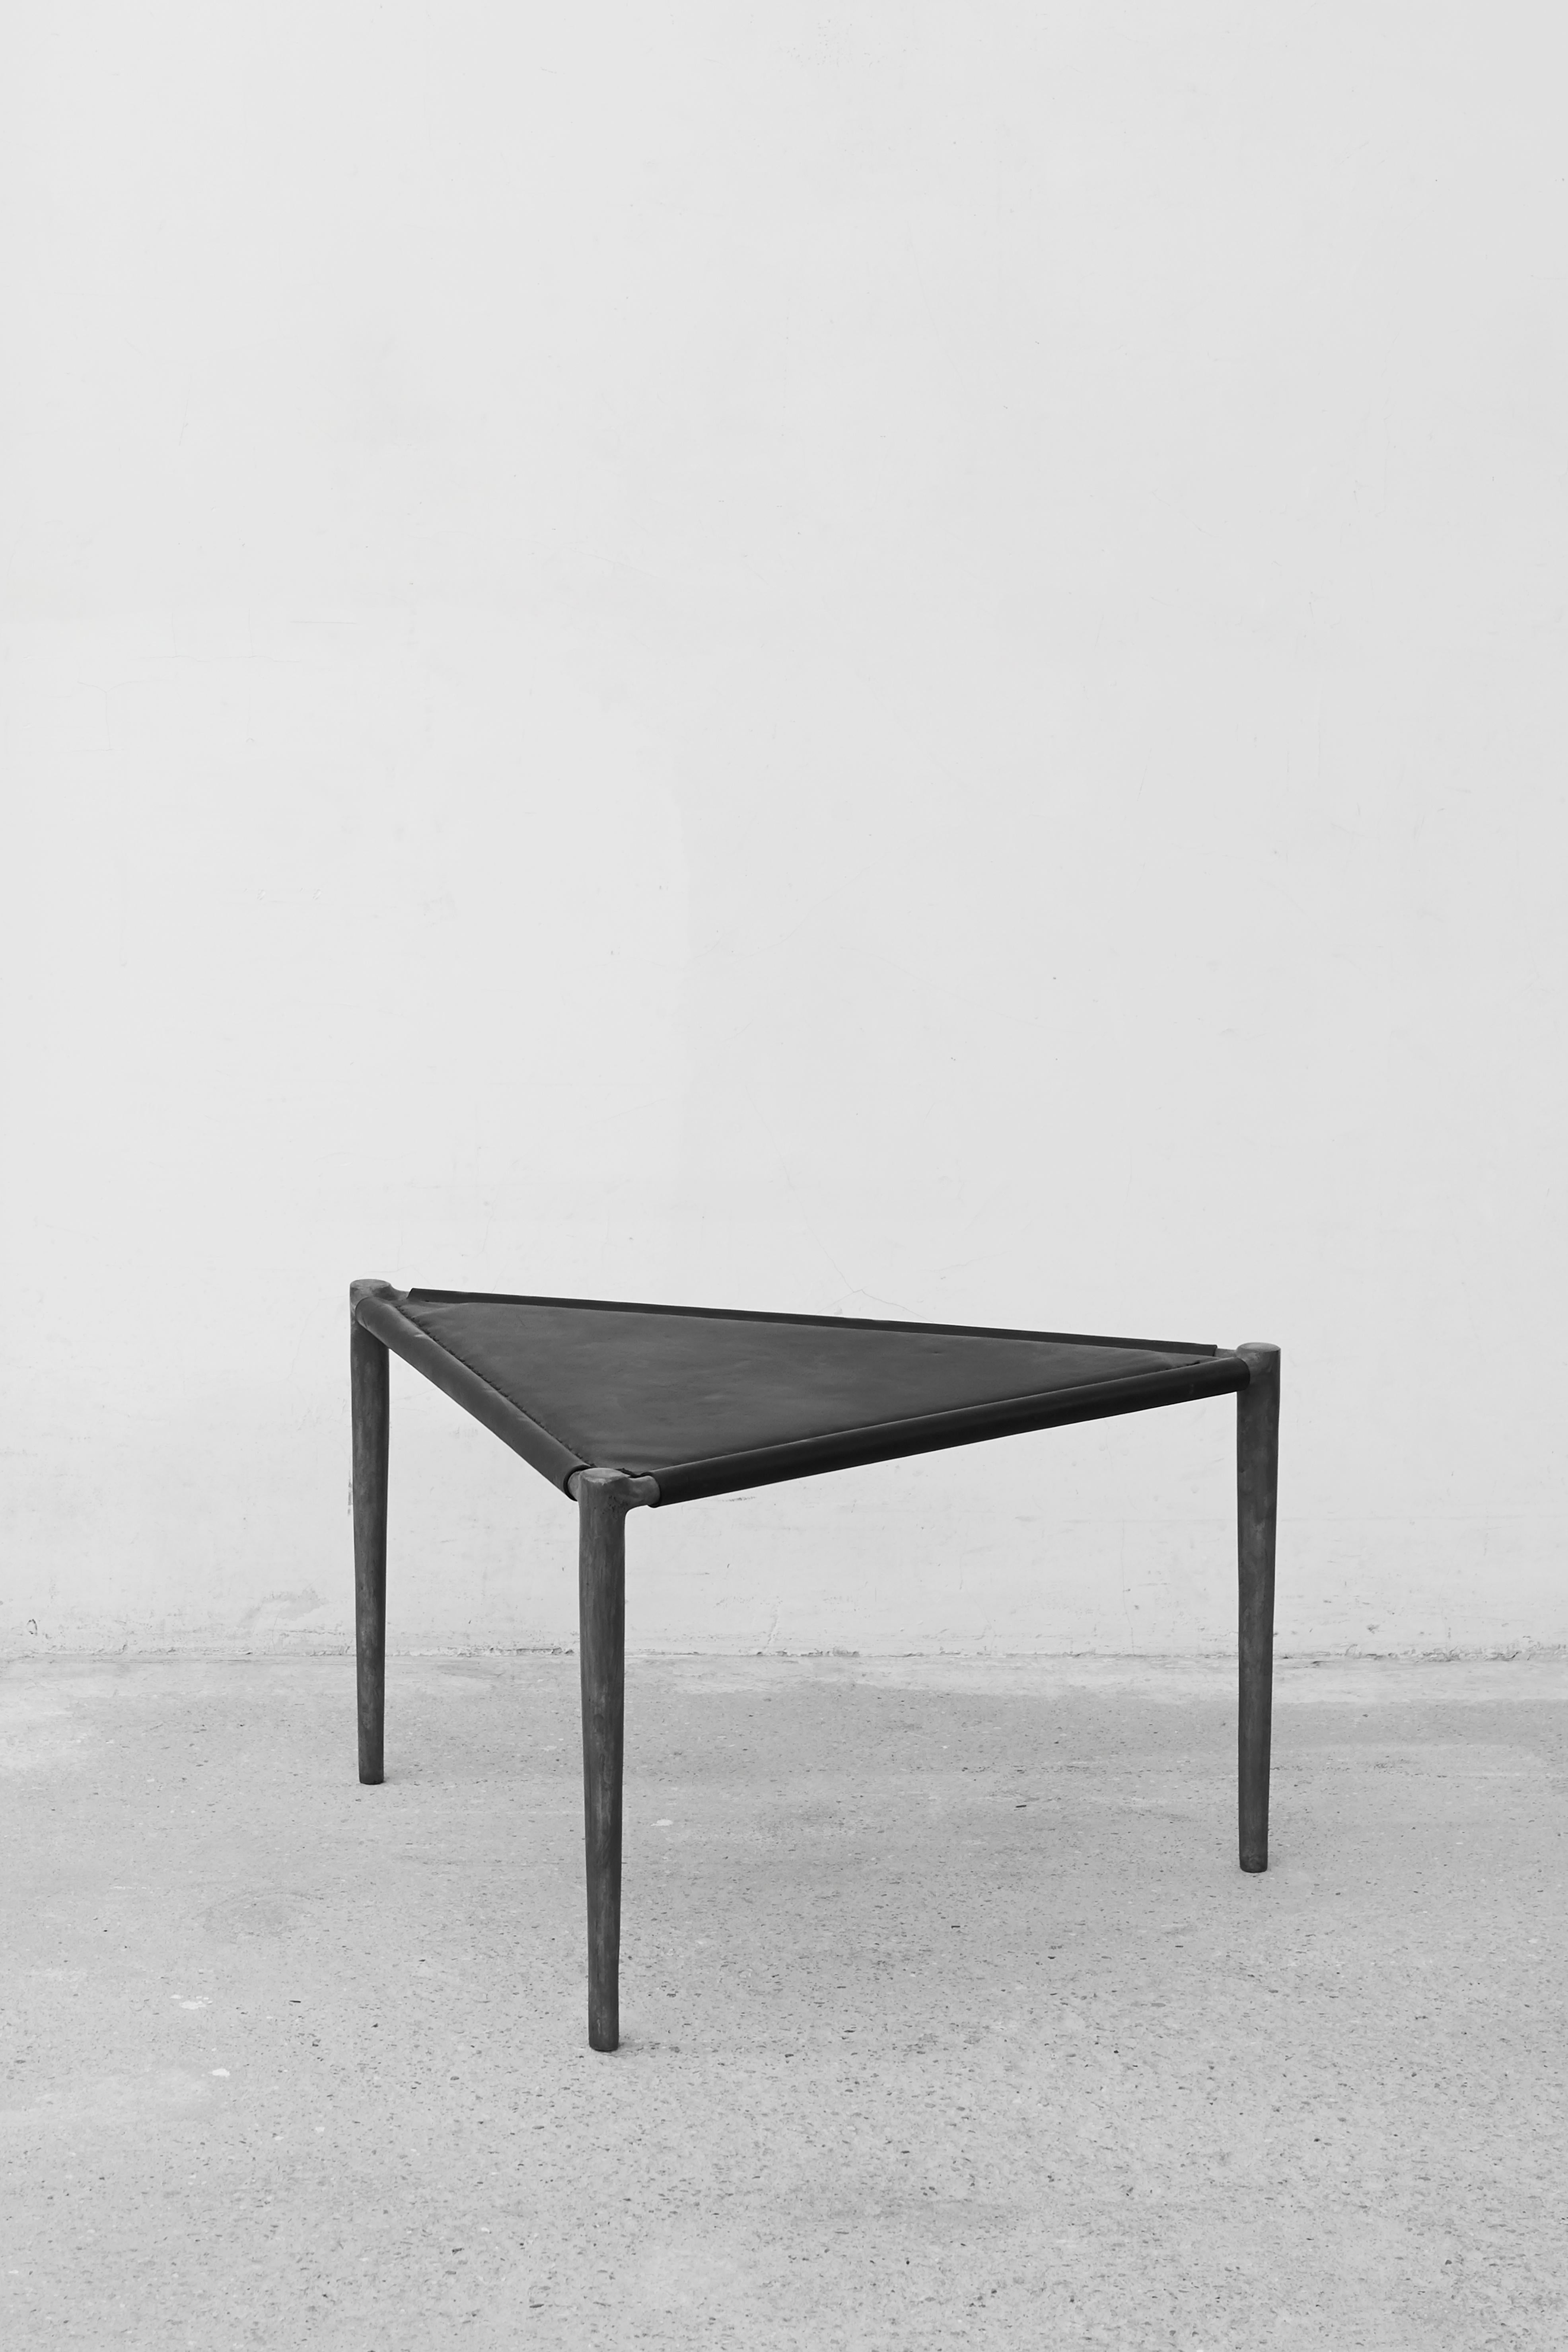 Alchemy stool by Rick Owens
2013
Dimensions: L 62 x W 50 x H 34 cm
Materials: Bronze
Weight: 10.5 kg

available in Black finish or Nitrate (Dark Brown) finish, please contact us.

Rick Owens is a California-born fashion and furniture has